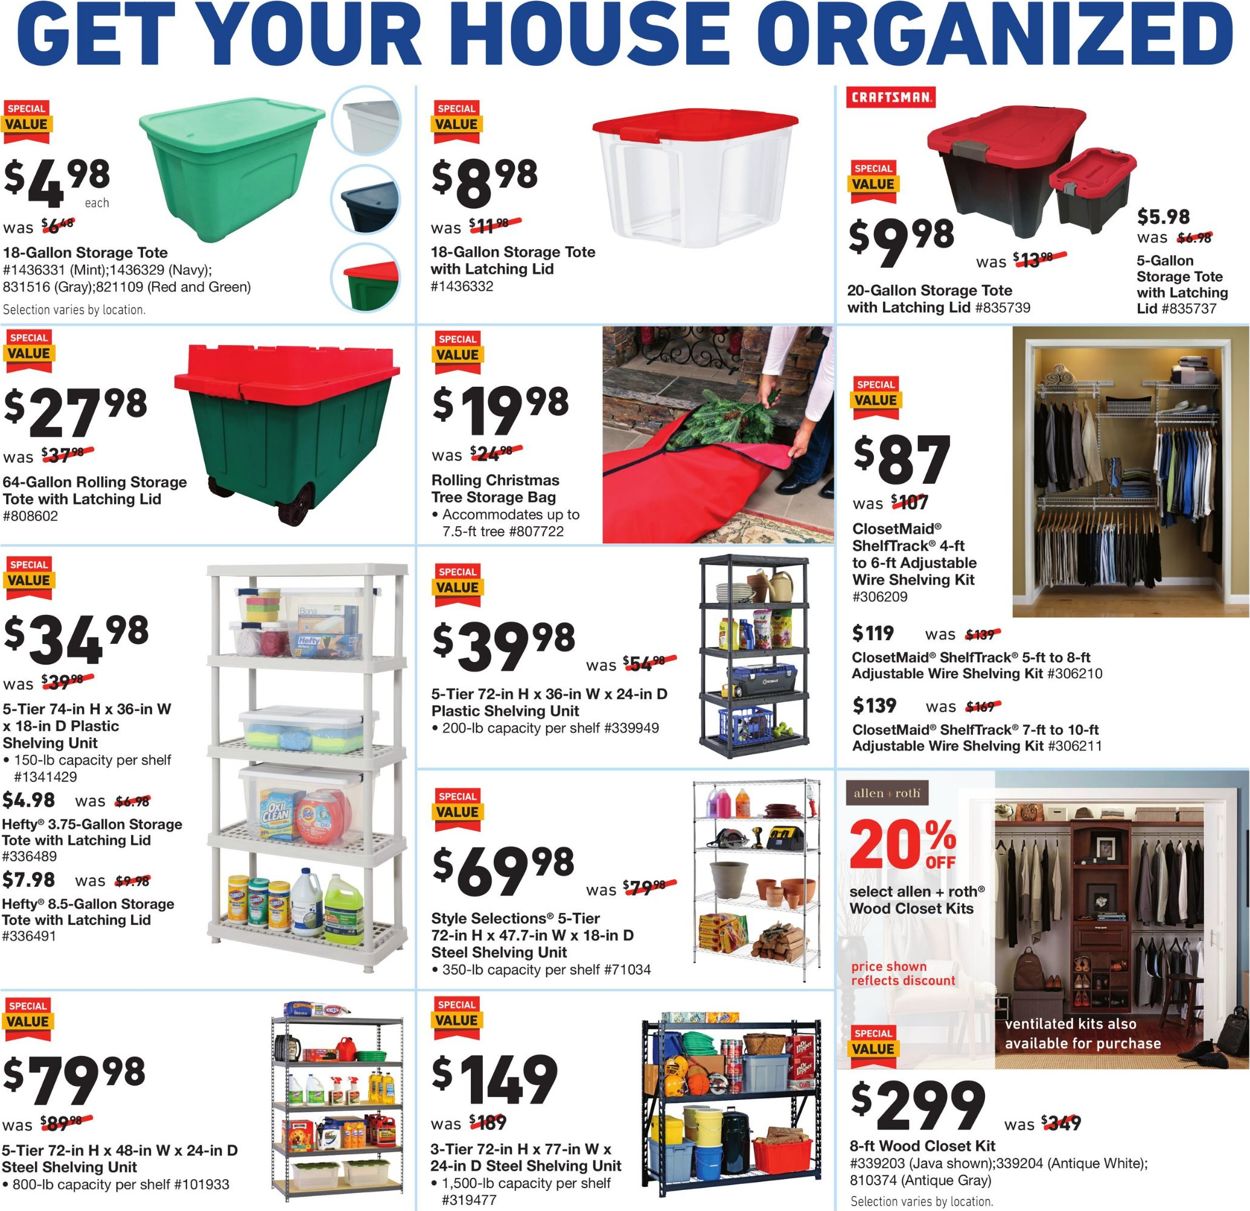 Lowe's - New Year's Ad 2019/2020 Weekly Ad Circular - valid 12/25-01/01/2020 (Page 2)